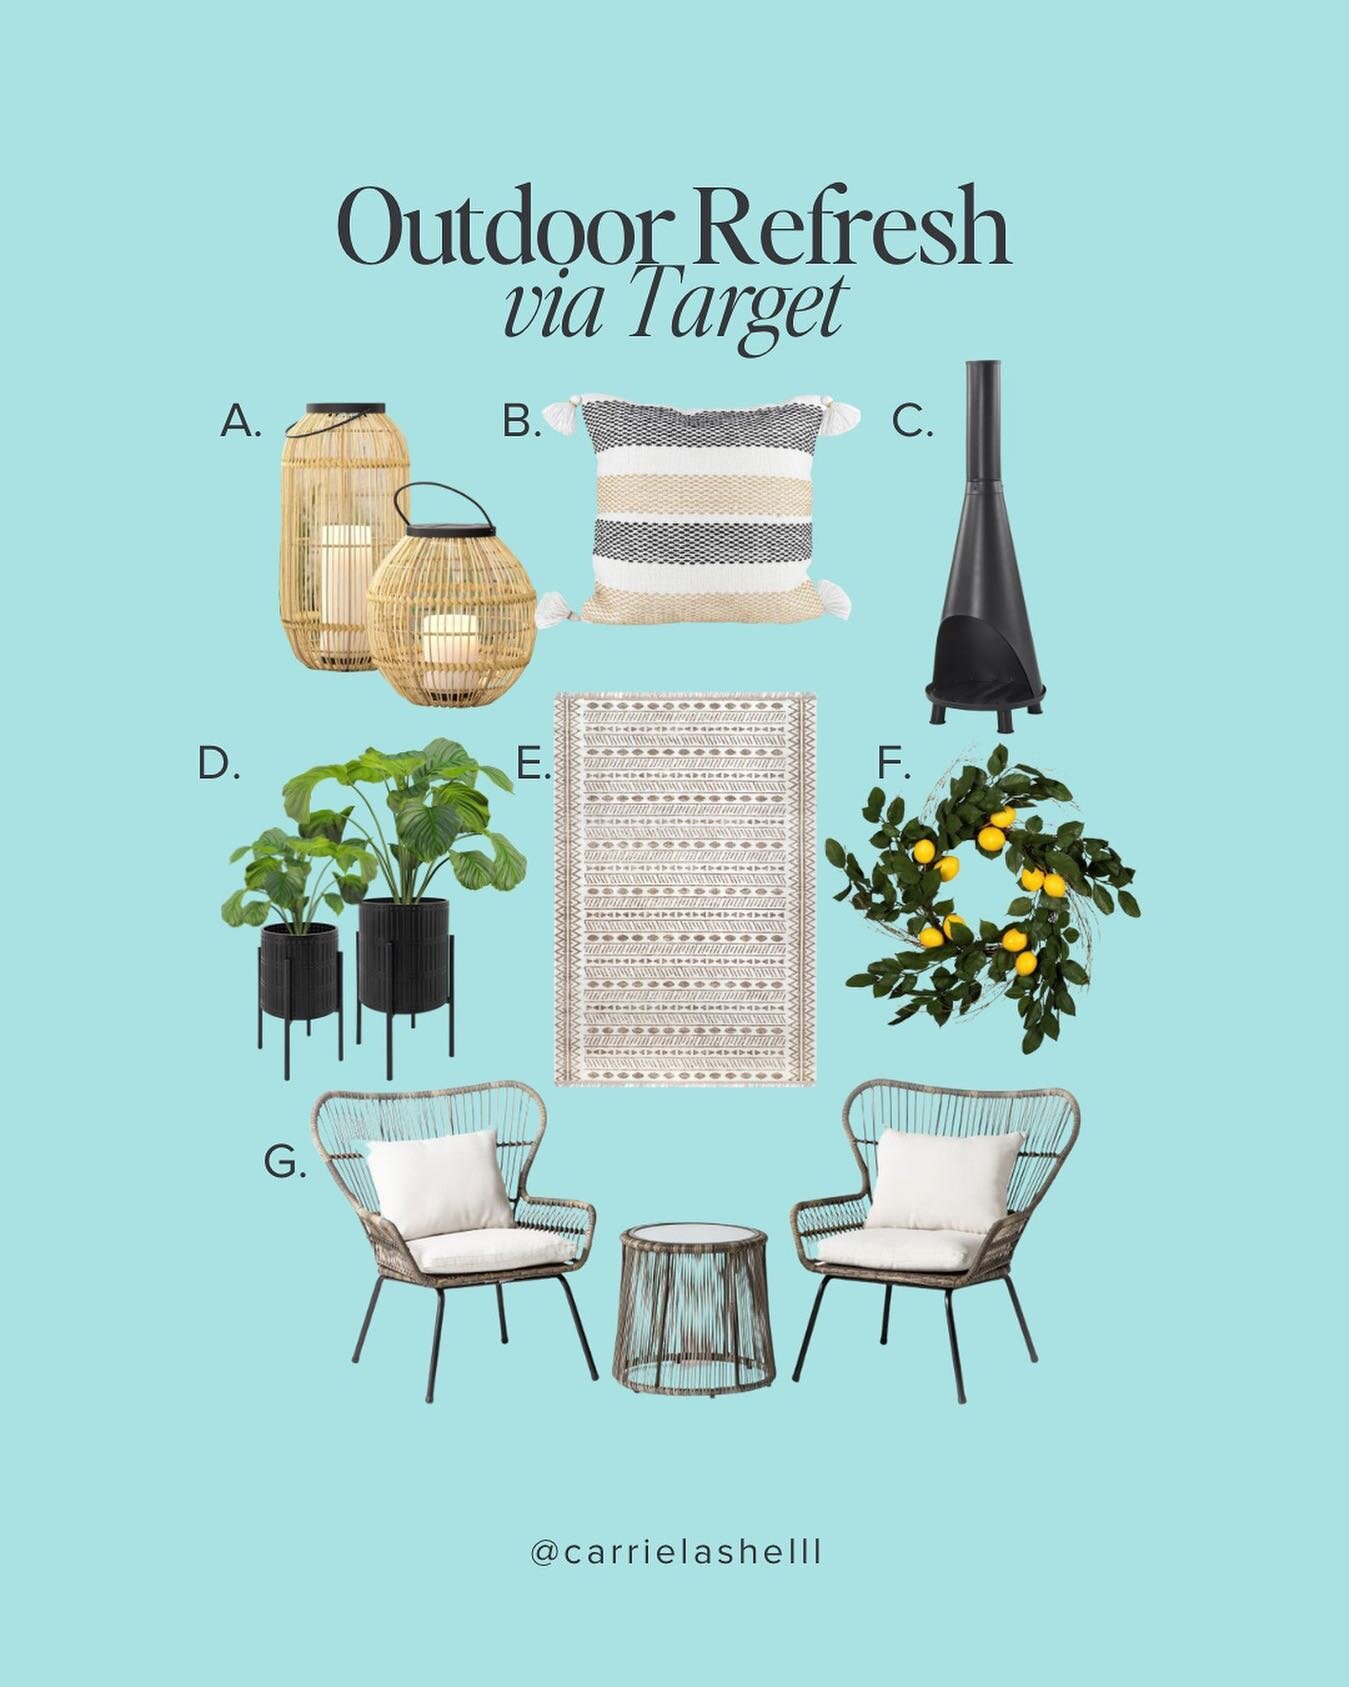 Looking to refresh your outdoor space? Head to your local Target and consider adding these fun finds to your cart! 🎯

A. Threshold Tall Wicker Outdoor Lantern 🏮

B. Home &amp; Garden Tan &amp; Black Tick Stripe Hand Woven Outdoor Pillow

C. Hearth 